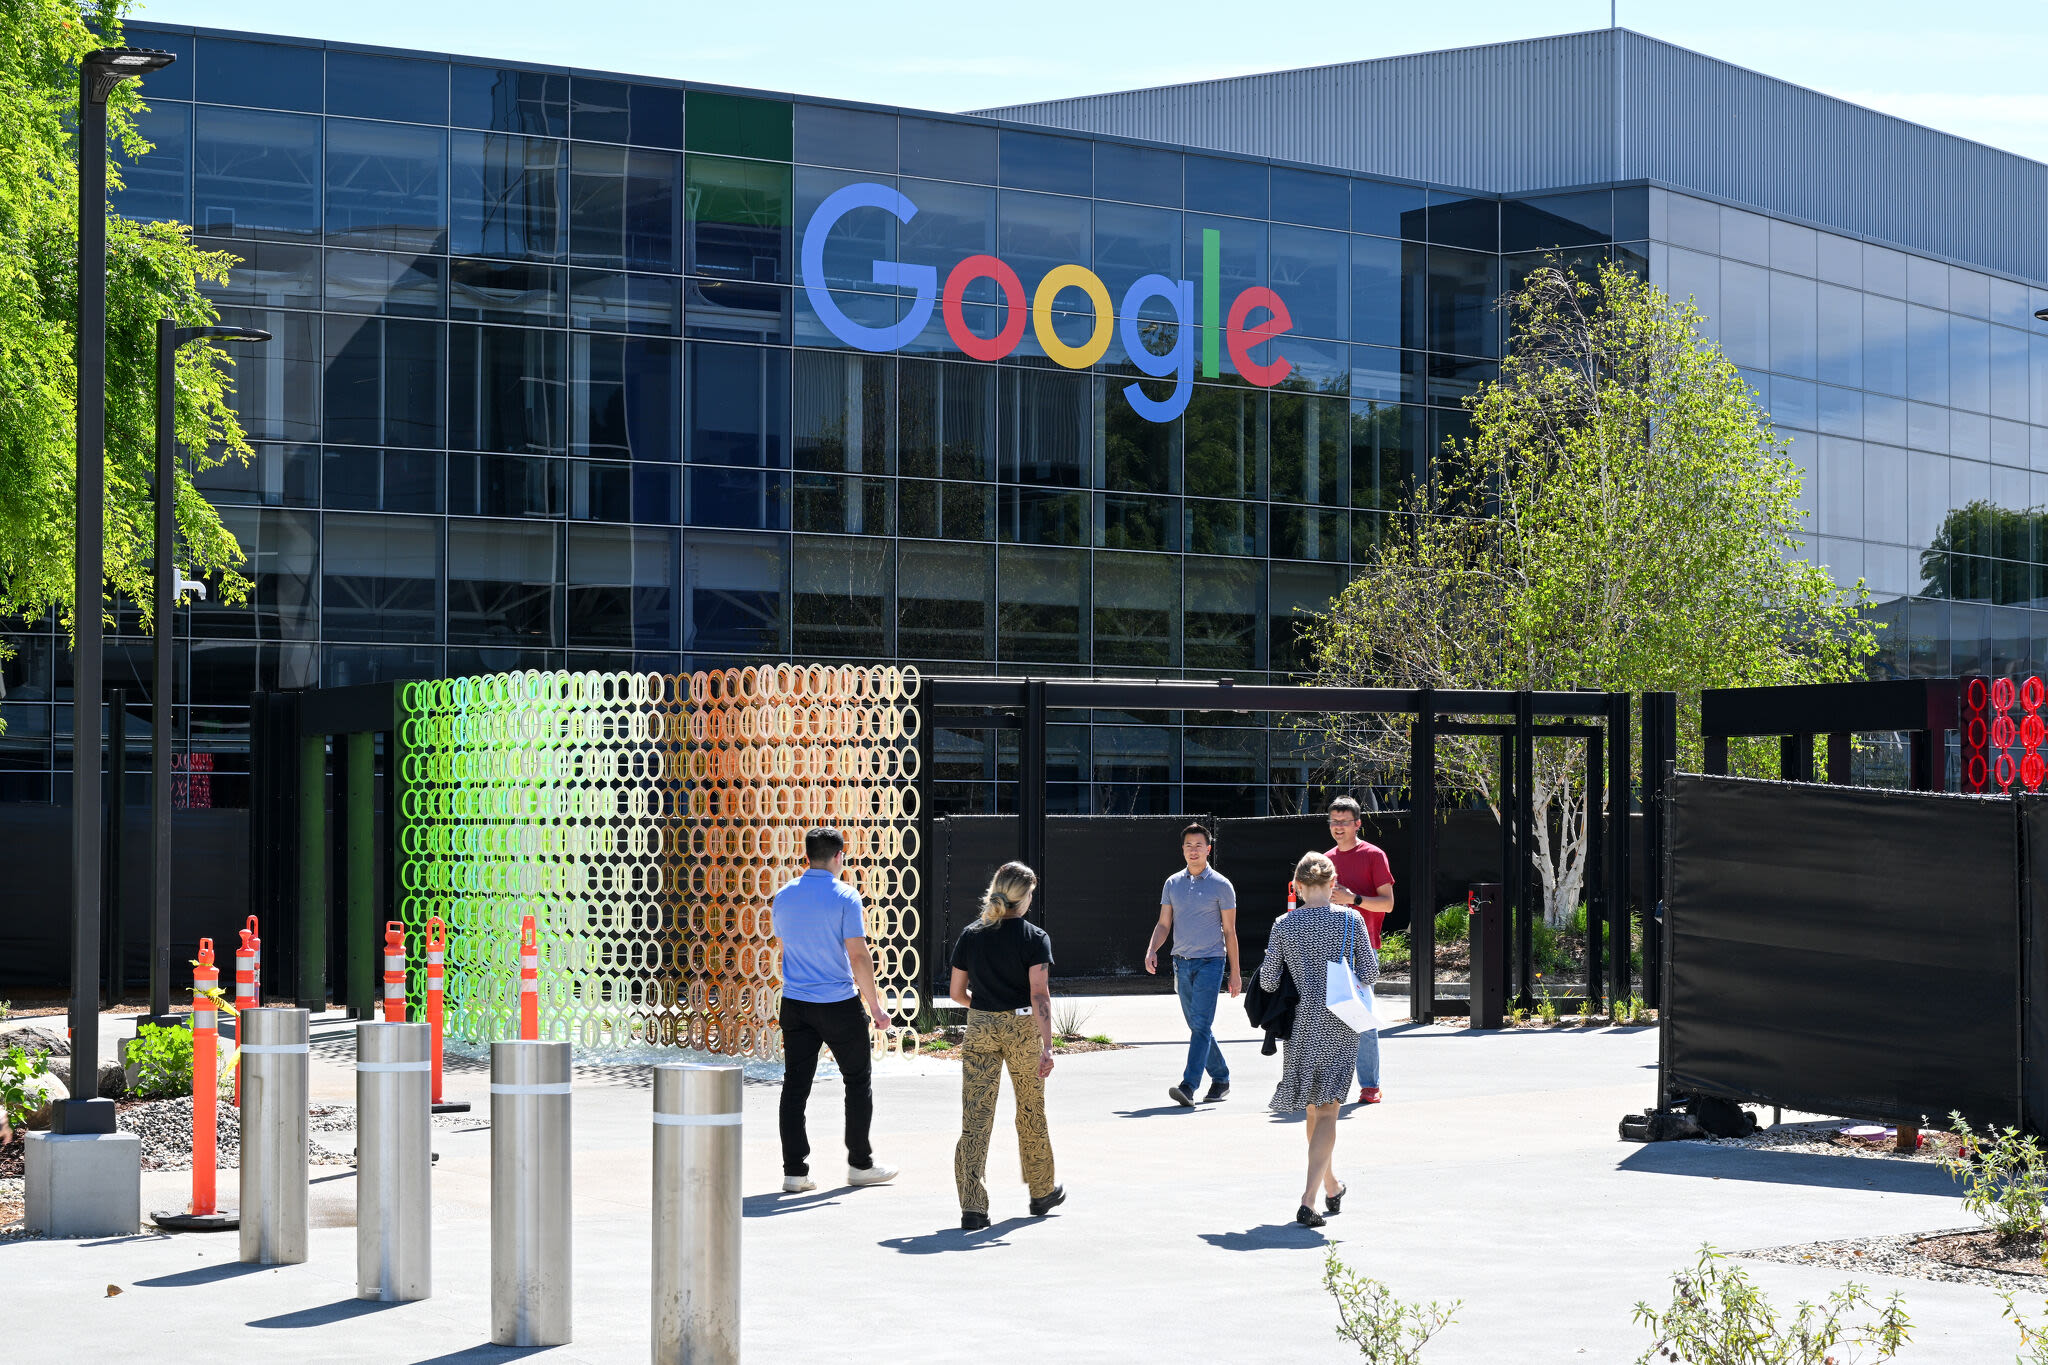 Google lays off dozens in Bay Area on way to record valuation